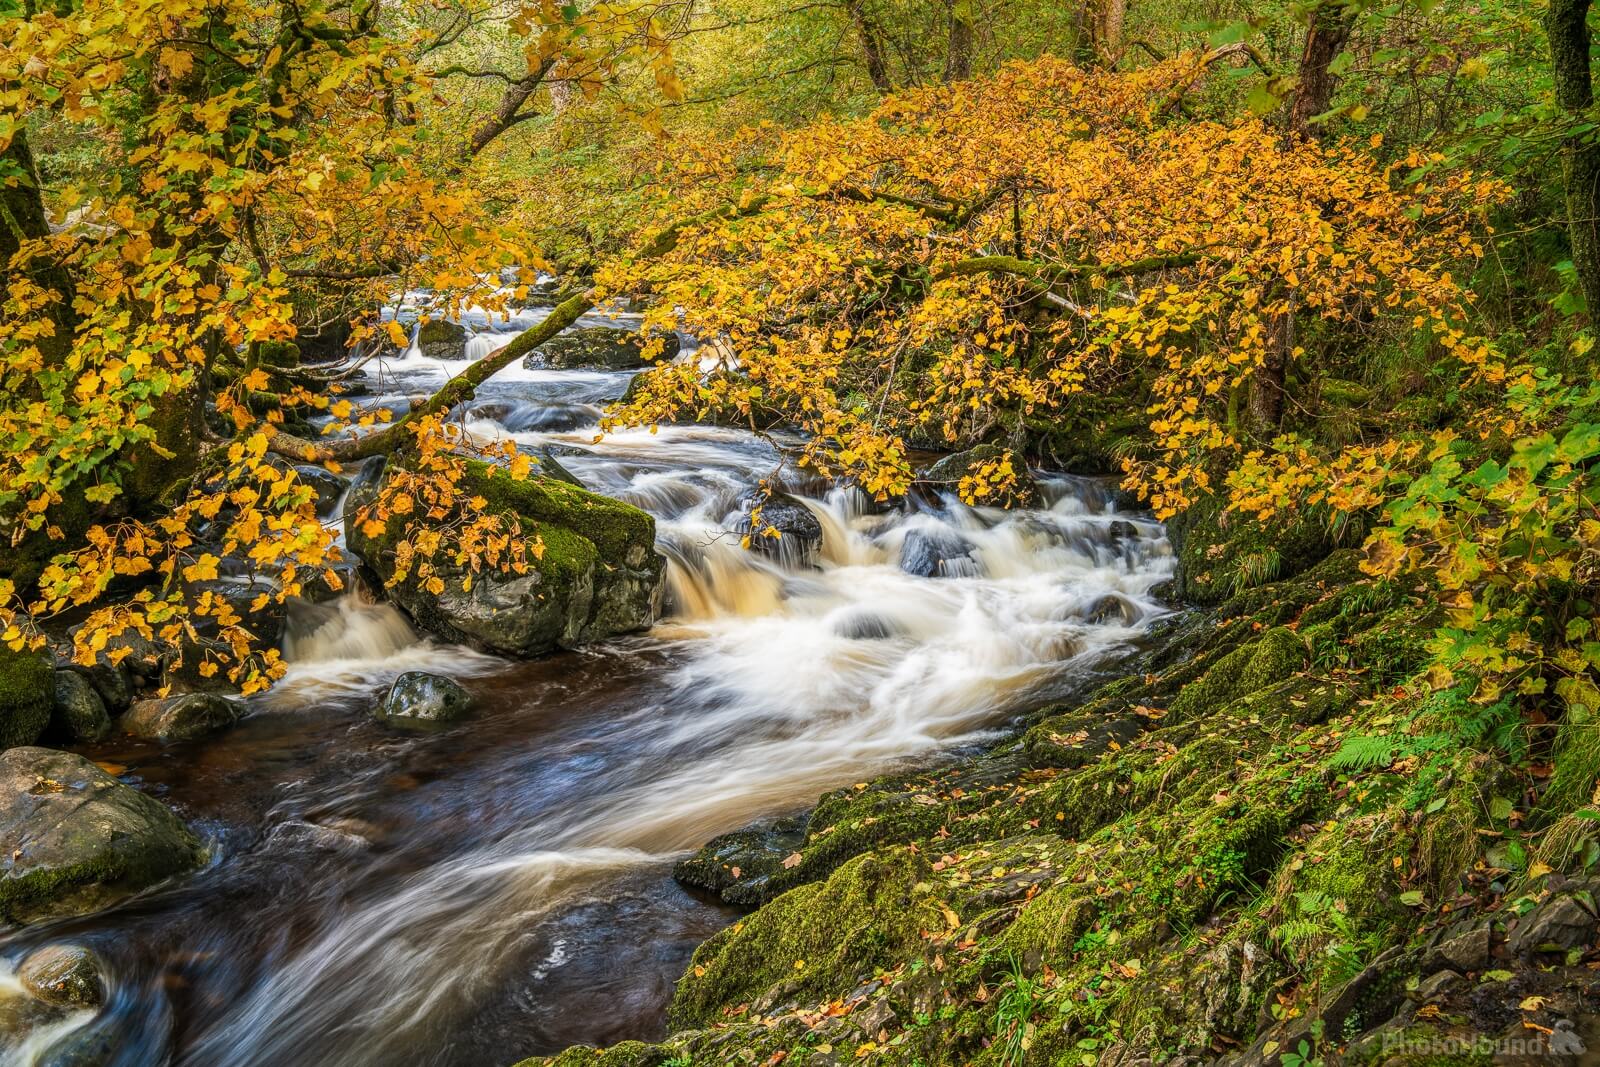 Image of Aira Force and High Forces, Lake District by James Billings.